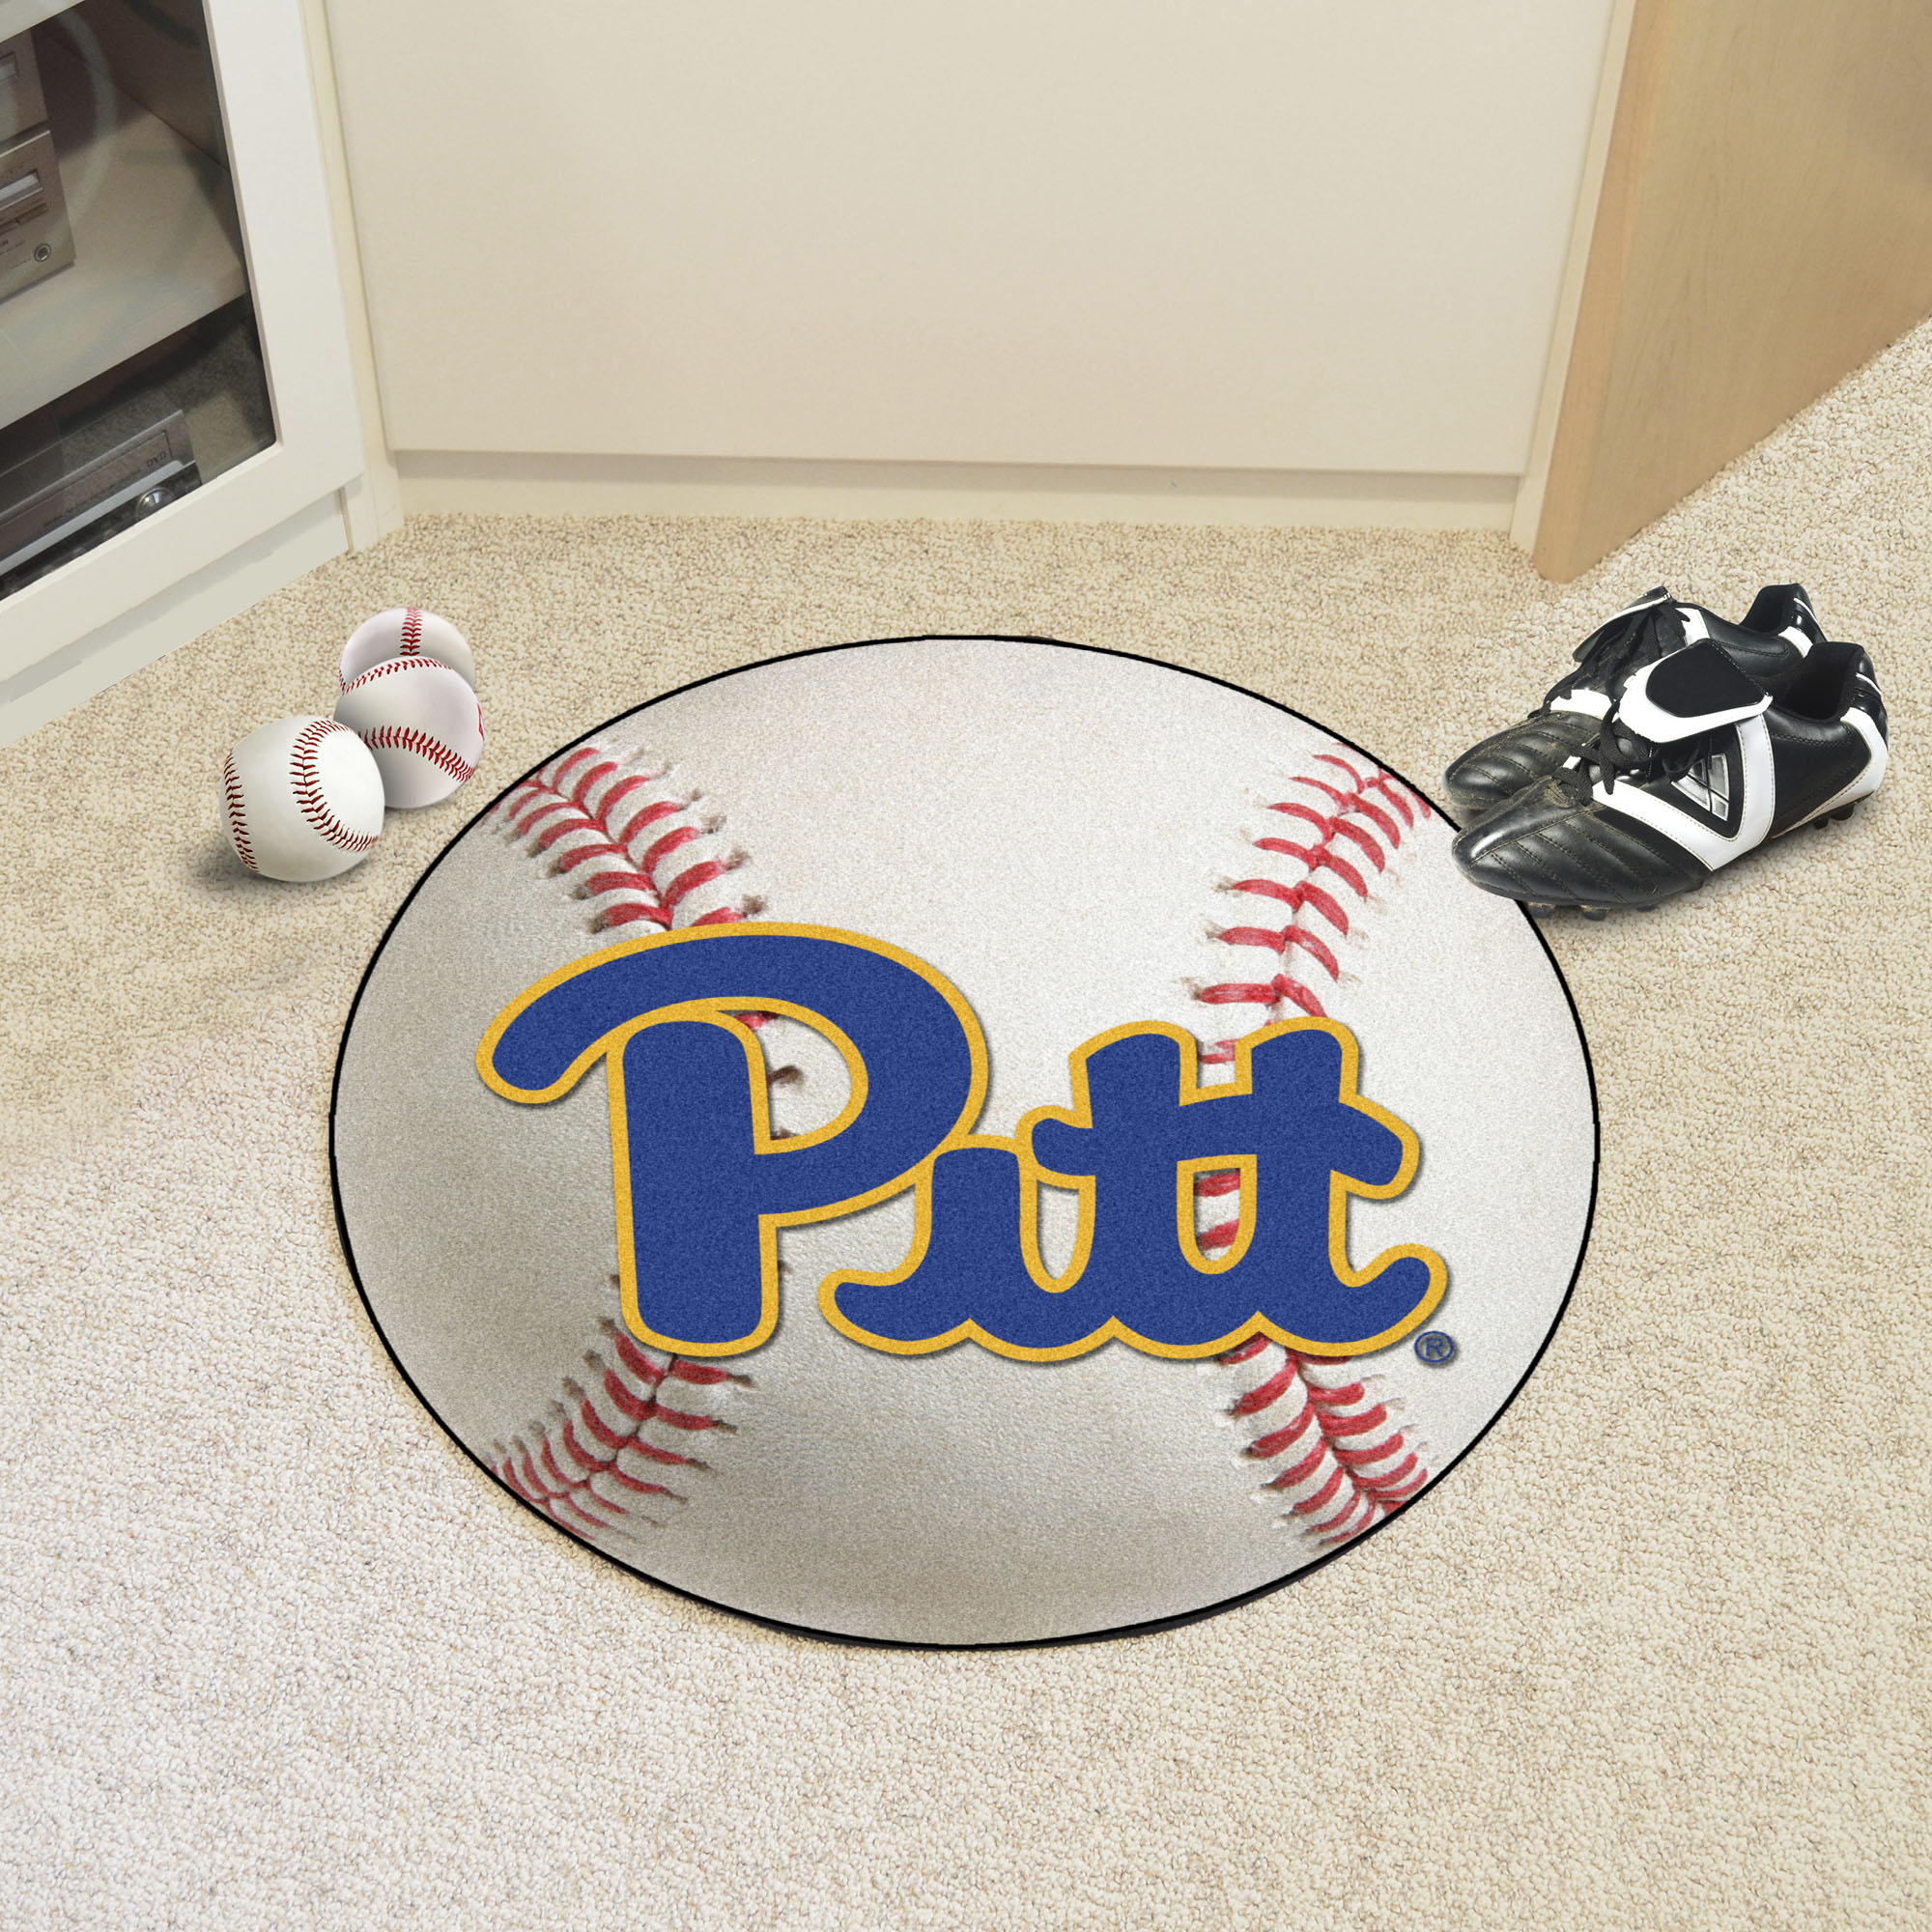 University of Pittsburgh Ball Shaped Area Rugs (Ball Shaped Area Rugs: Baseball)